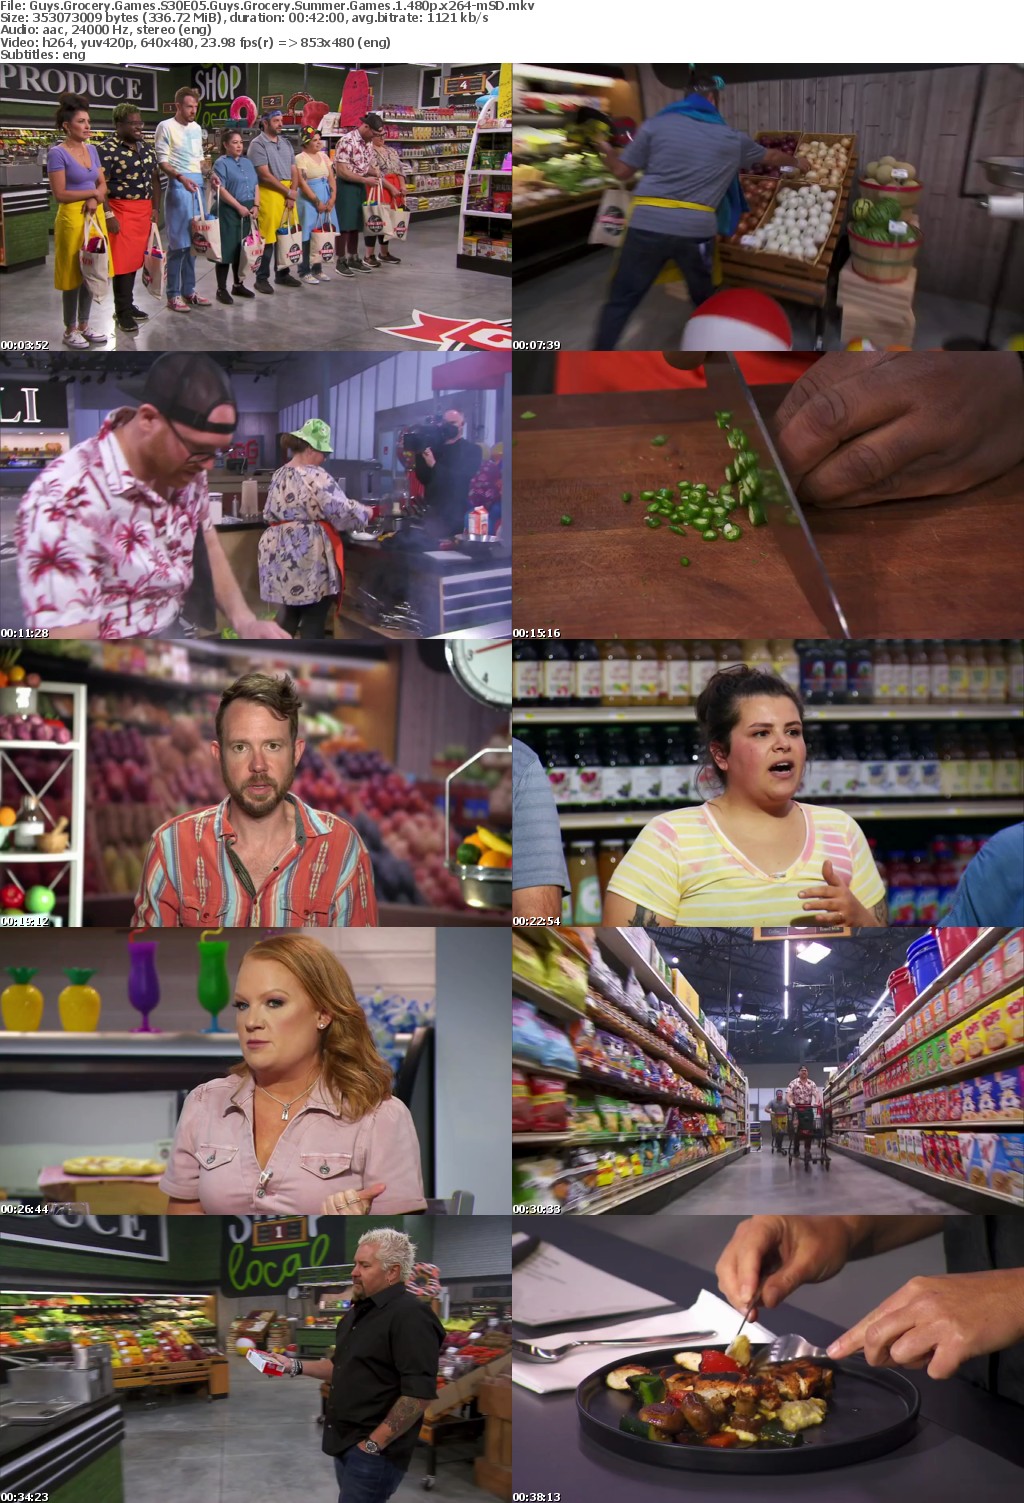 Guys Grocery Games S30E05 Guys Grocery Summer Games 1 480p x264-mSD